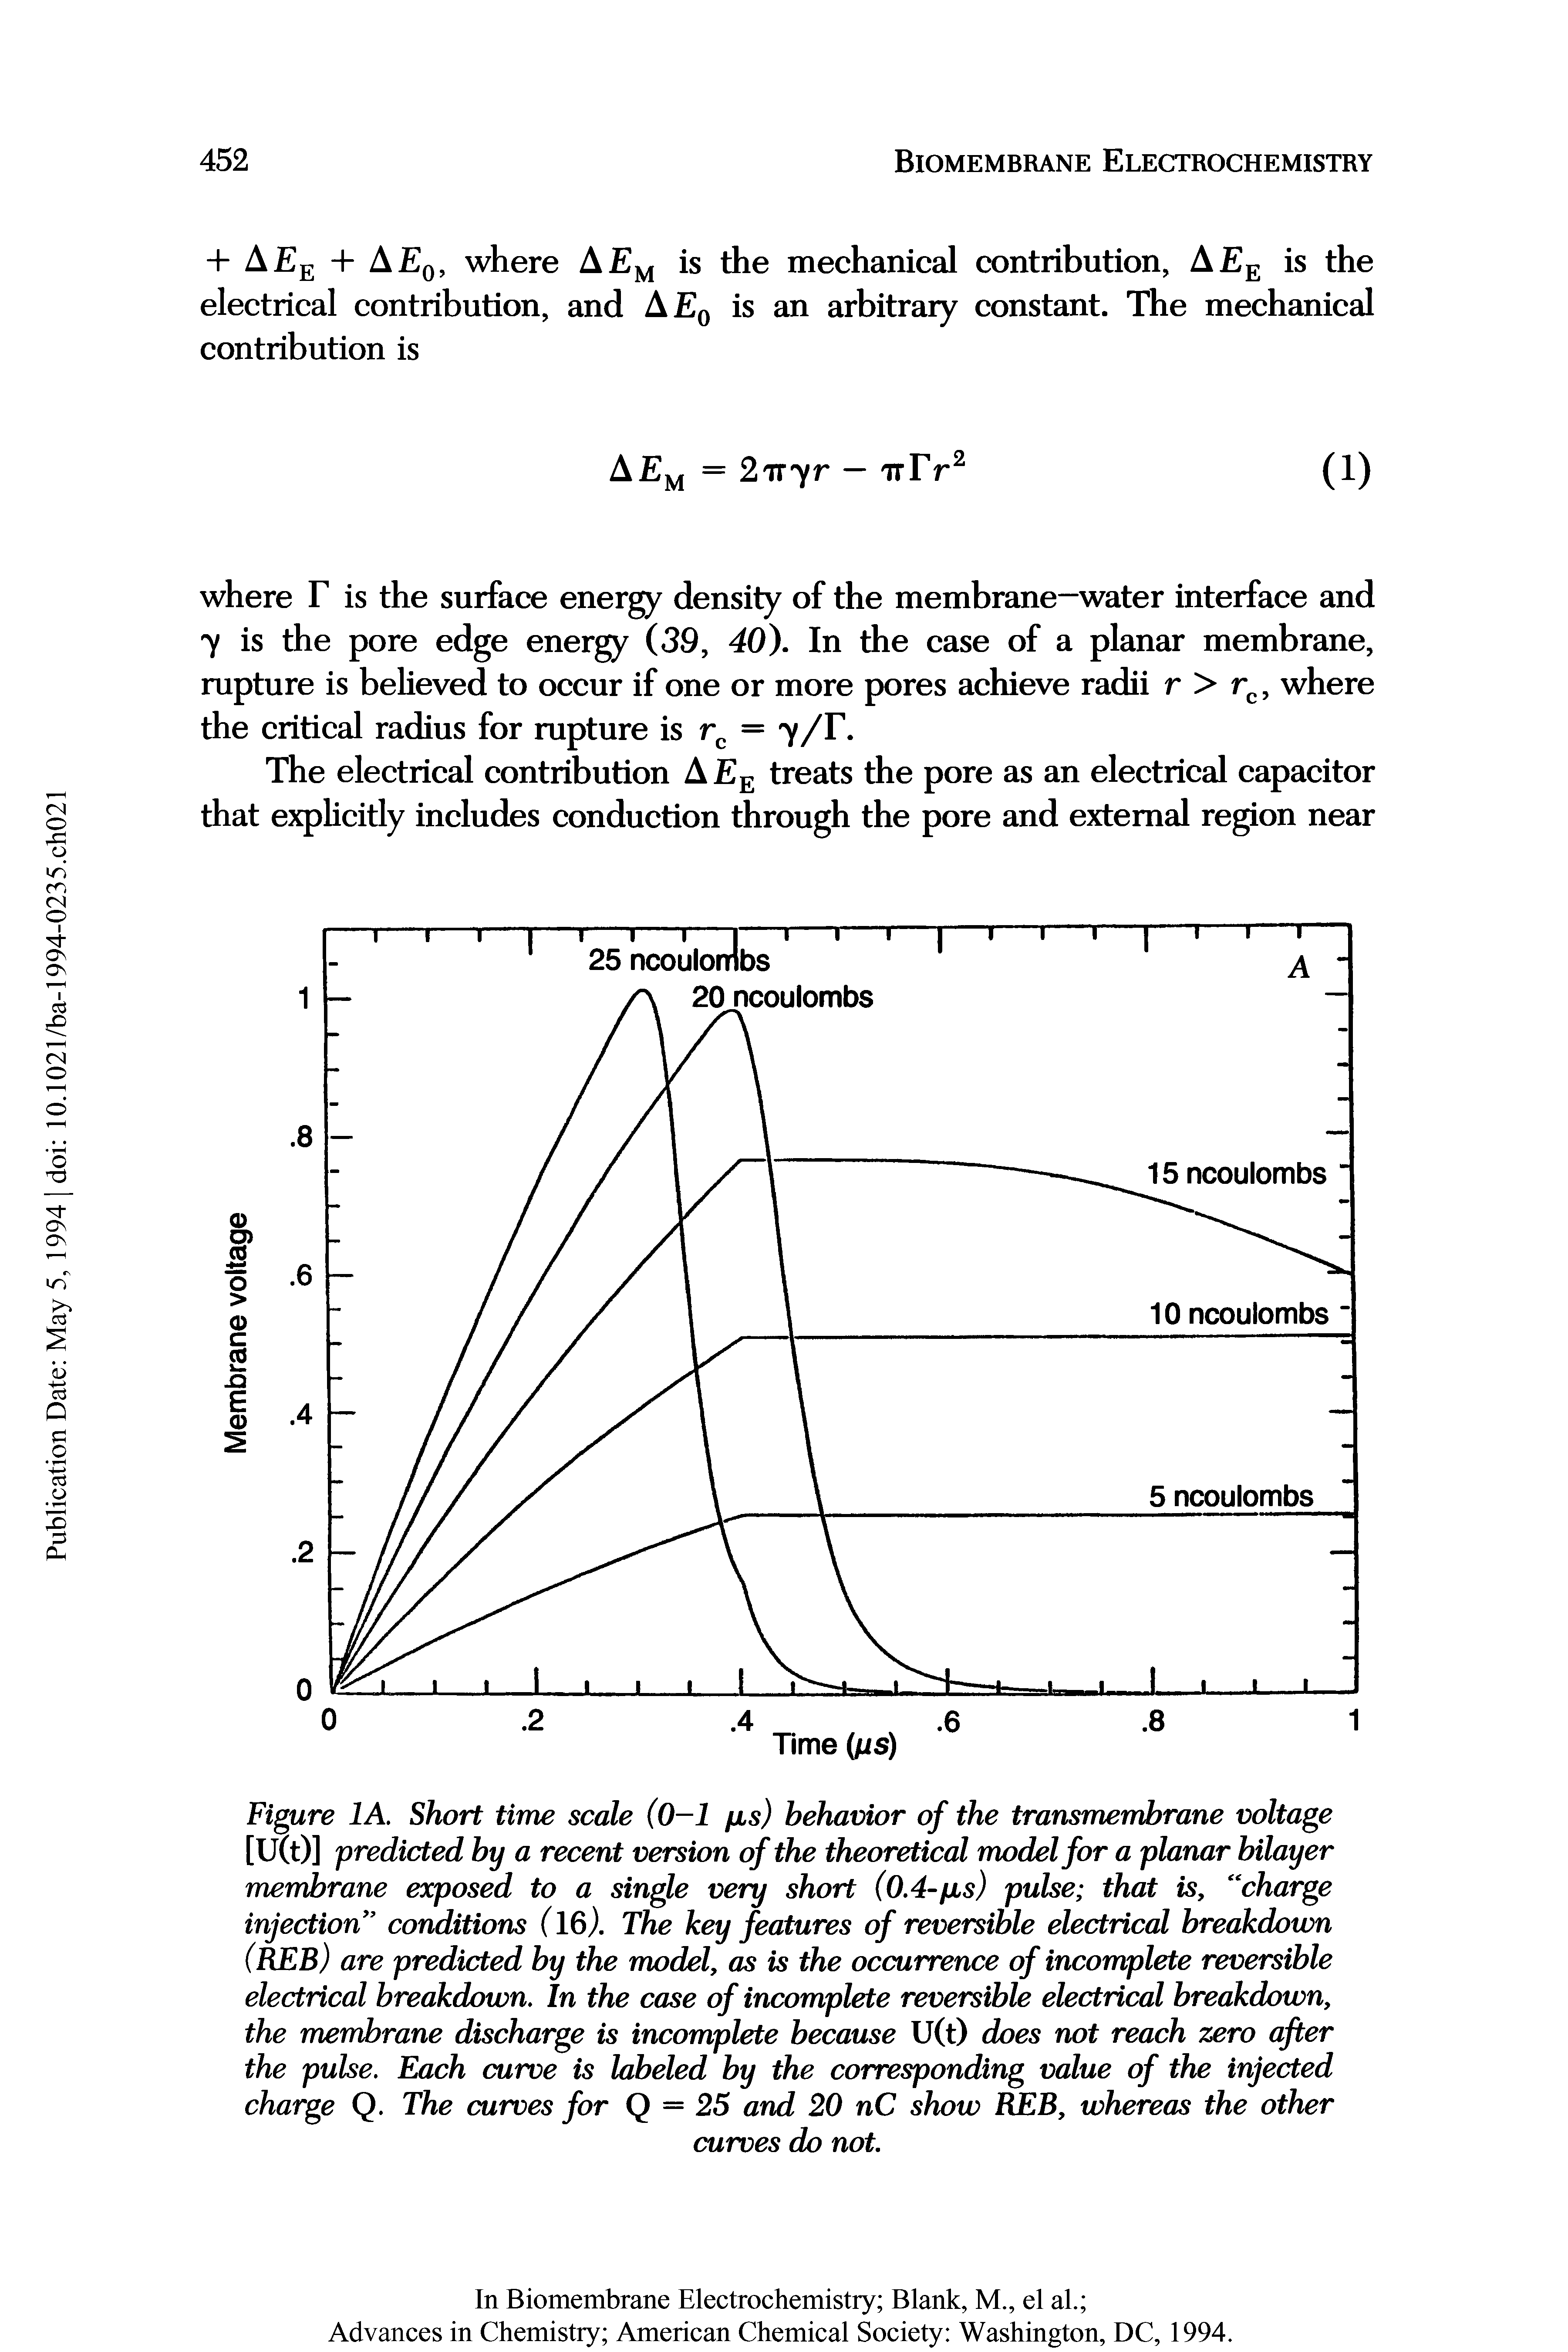 Figure 1A. Short time scale (0-1 pus) behavior of the transmembrane voltage [U(t)] predicted by a recent version of the theoretical model for a planar bilayer membrane exposed to a single very short (0.4-fis) pulse that is, charge injection conditions (16). The key features of reversible electrical breakdown (REB) are predicted by the model, as is the occurrence of incomplete reversible electrical breakdown. In the case of incomplete reversible electrical breakdown, the membrane discharge is incomplete because U(t) does not reach zero after the pulse. Each curve is labeled by the corresponding value of the injected charge Q. The curves for Q = 25 and 20 nC show REB, whereas the other...